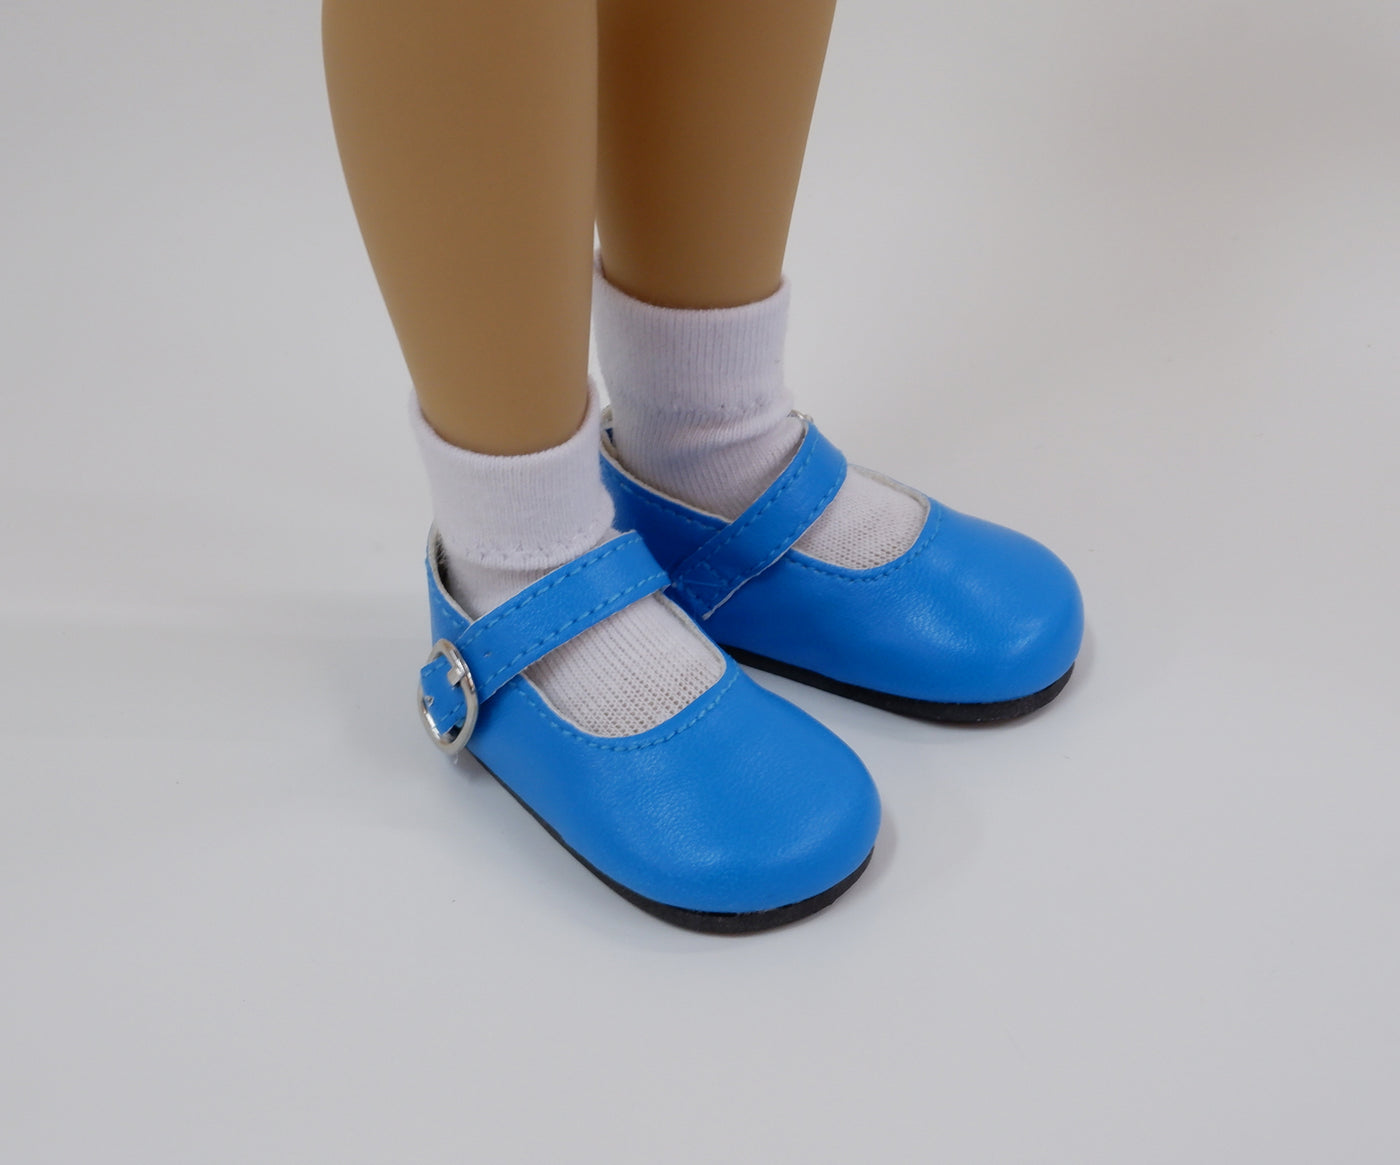 FACTORY SECONDS Simple Mary Jane Shoes - Bright Blue